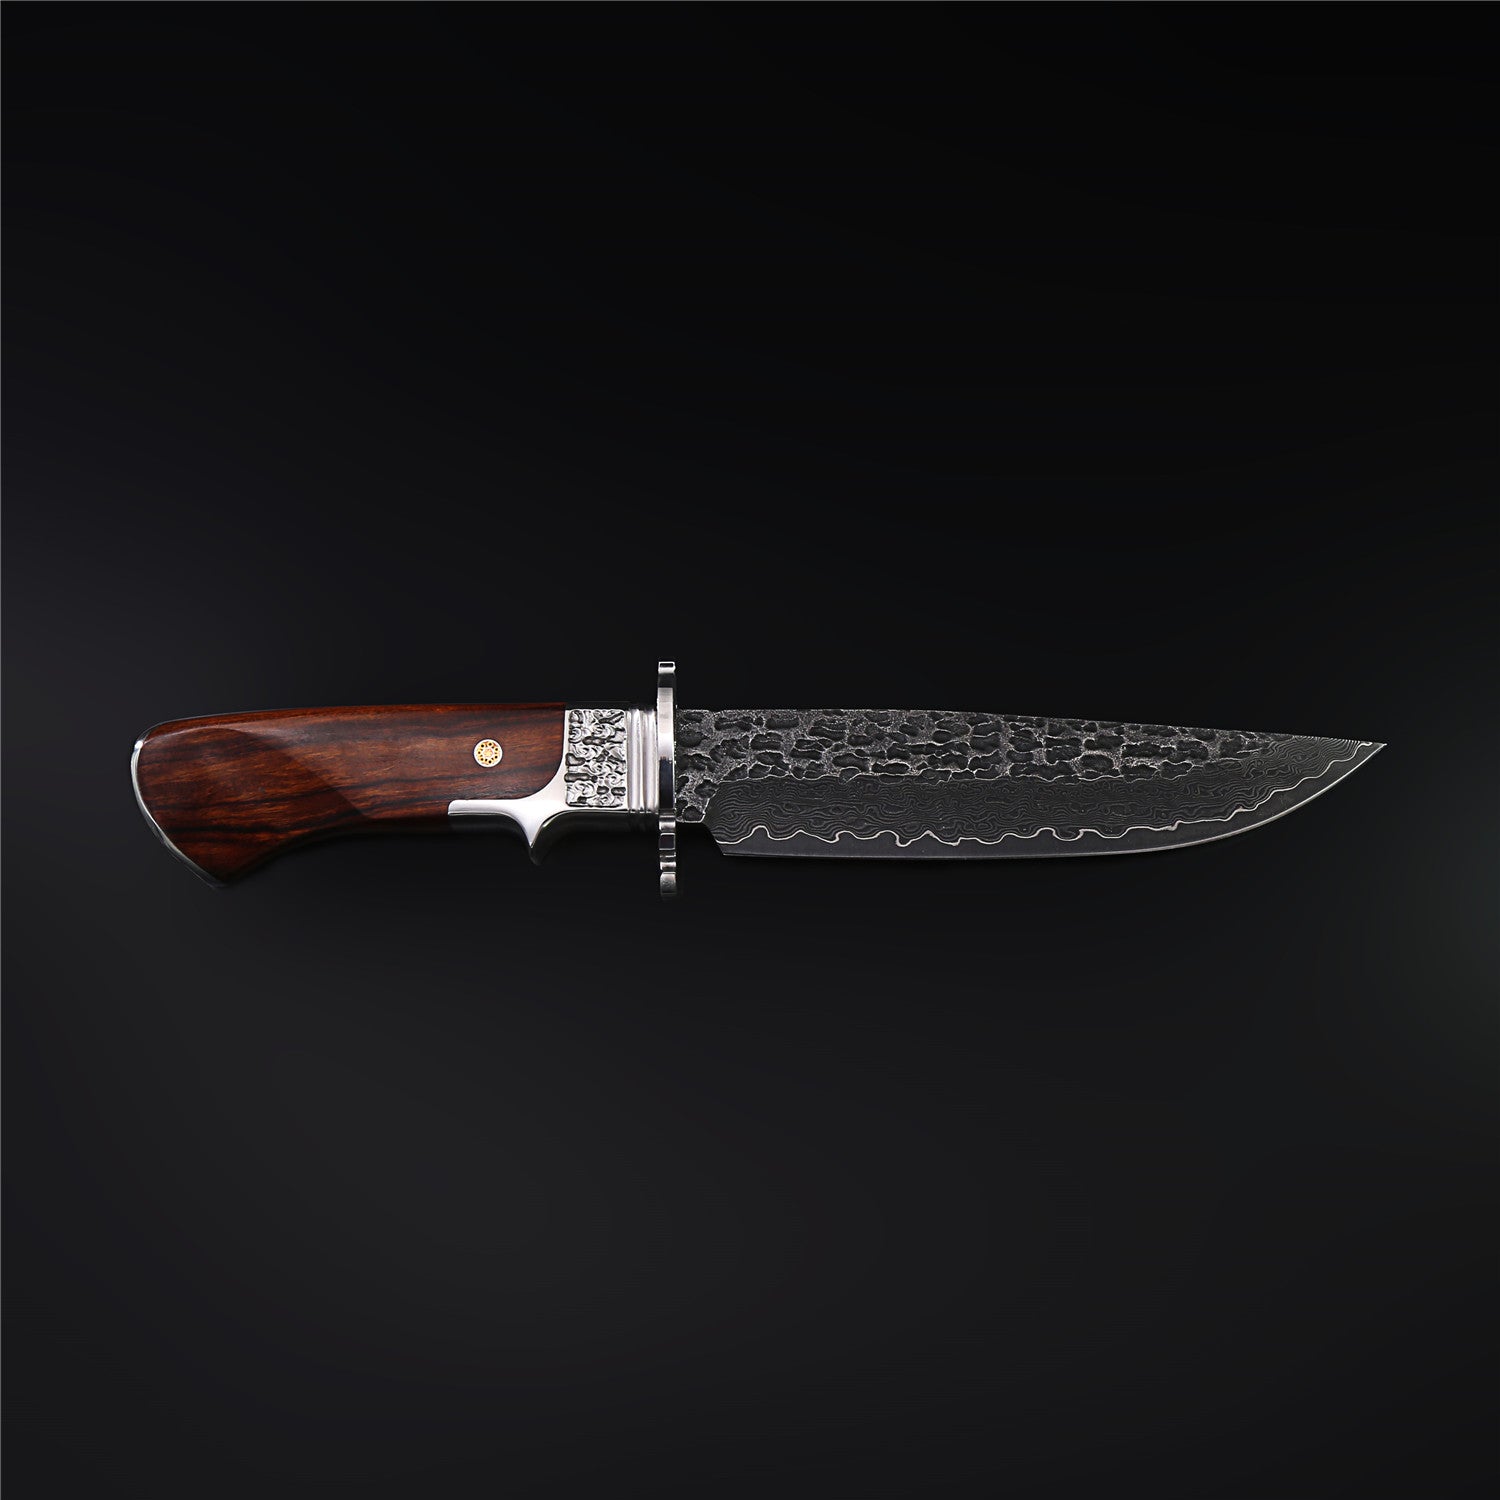 The Craftsman Damascus Steel Fixed Blade